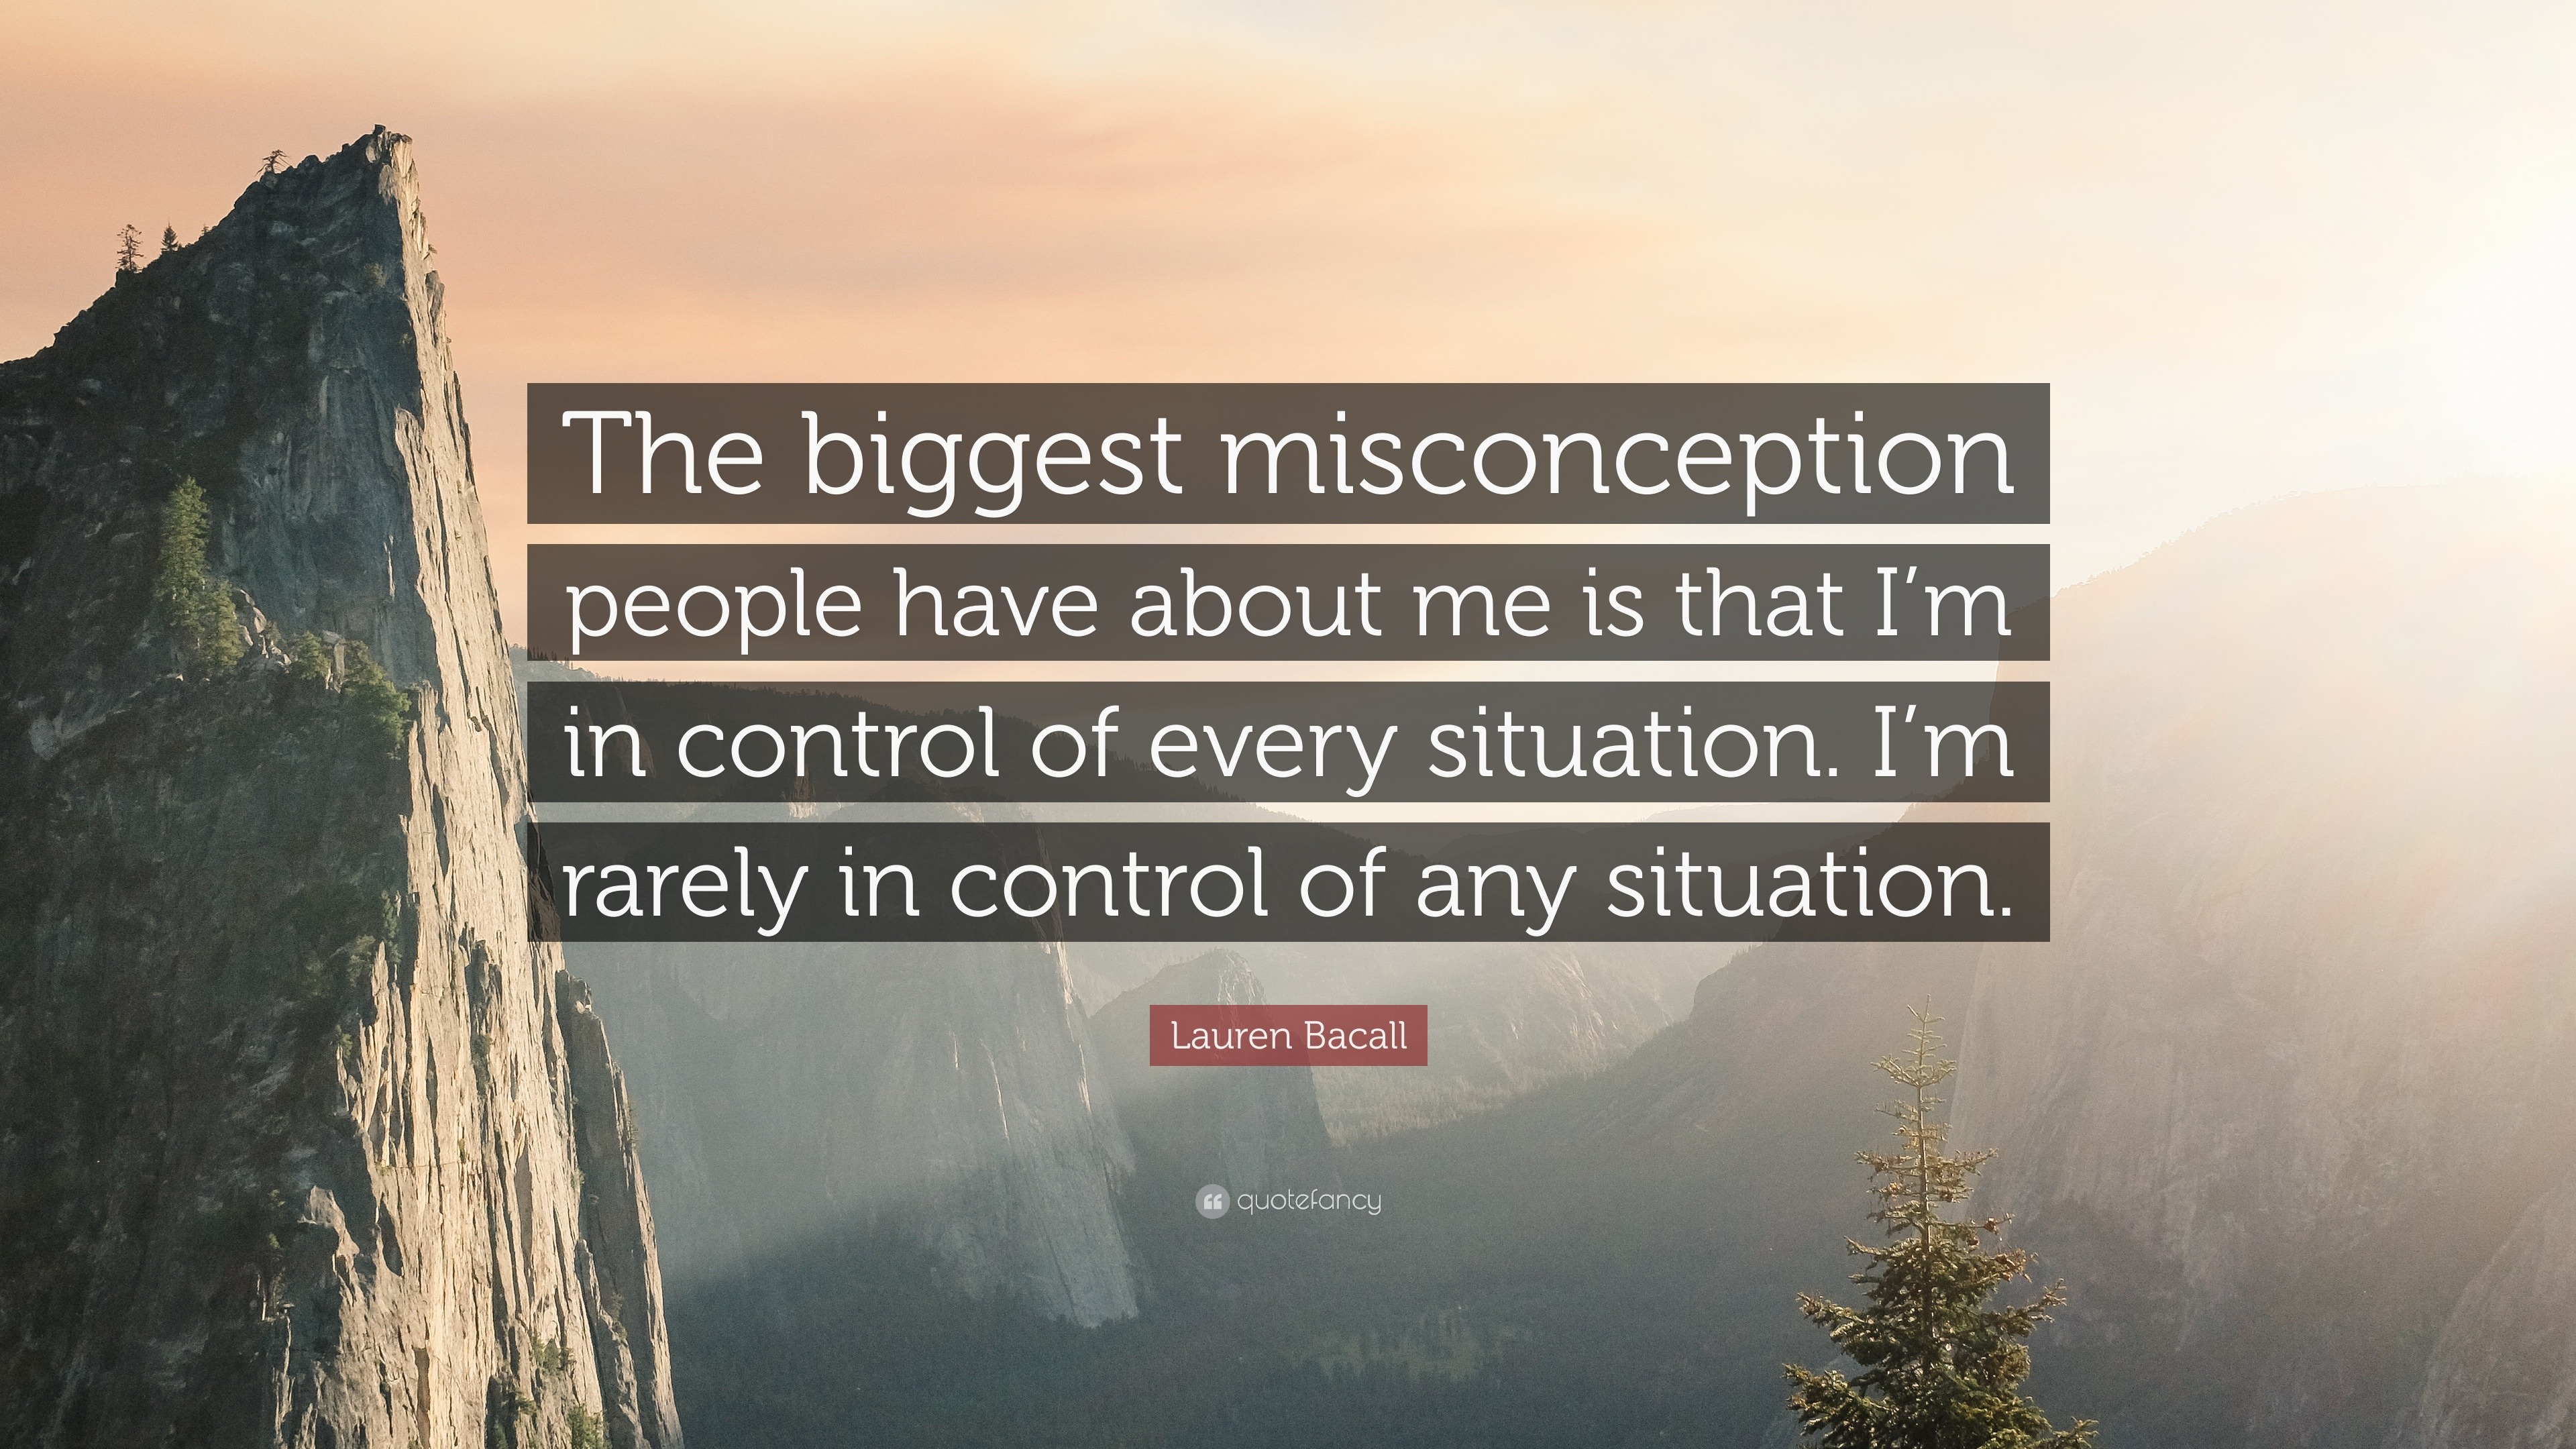 Lauren Bacall Quote “The biggest misconception people have about me is